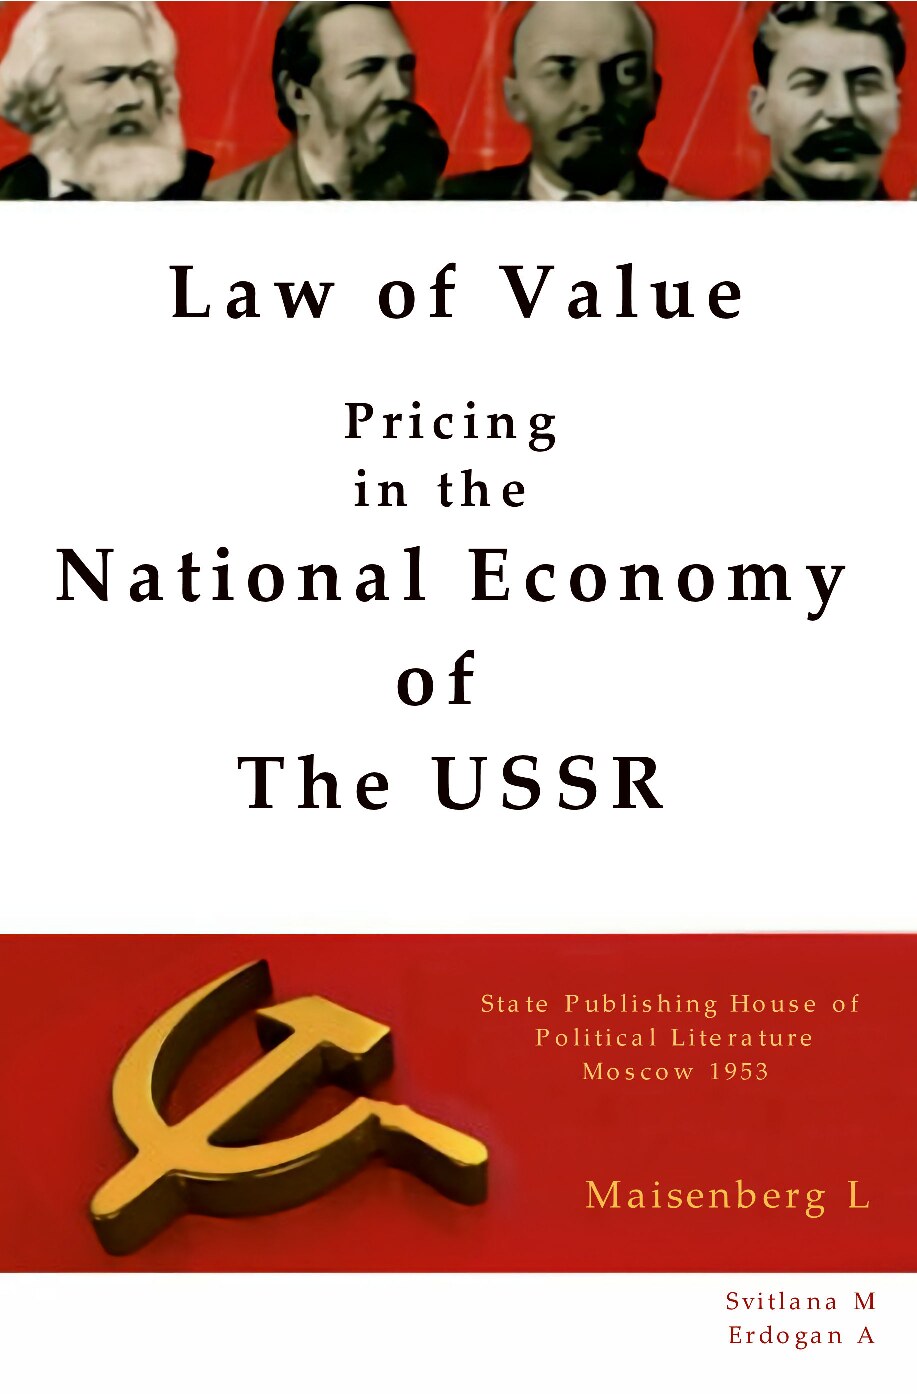 Law of Value: Pricing in the National Economy of The USSR